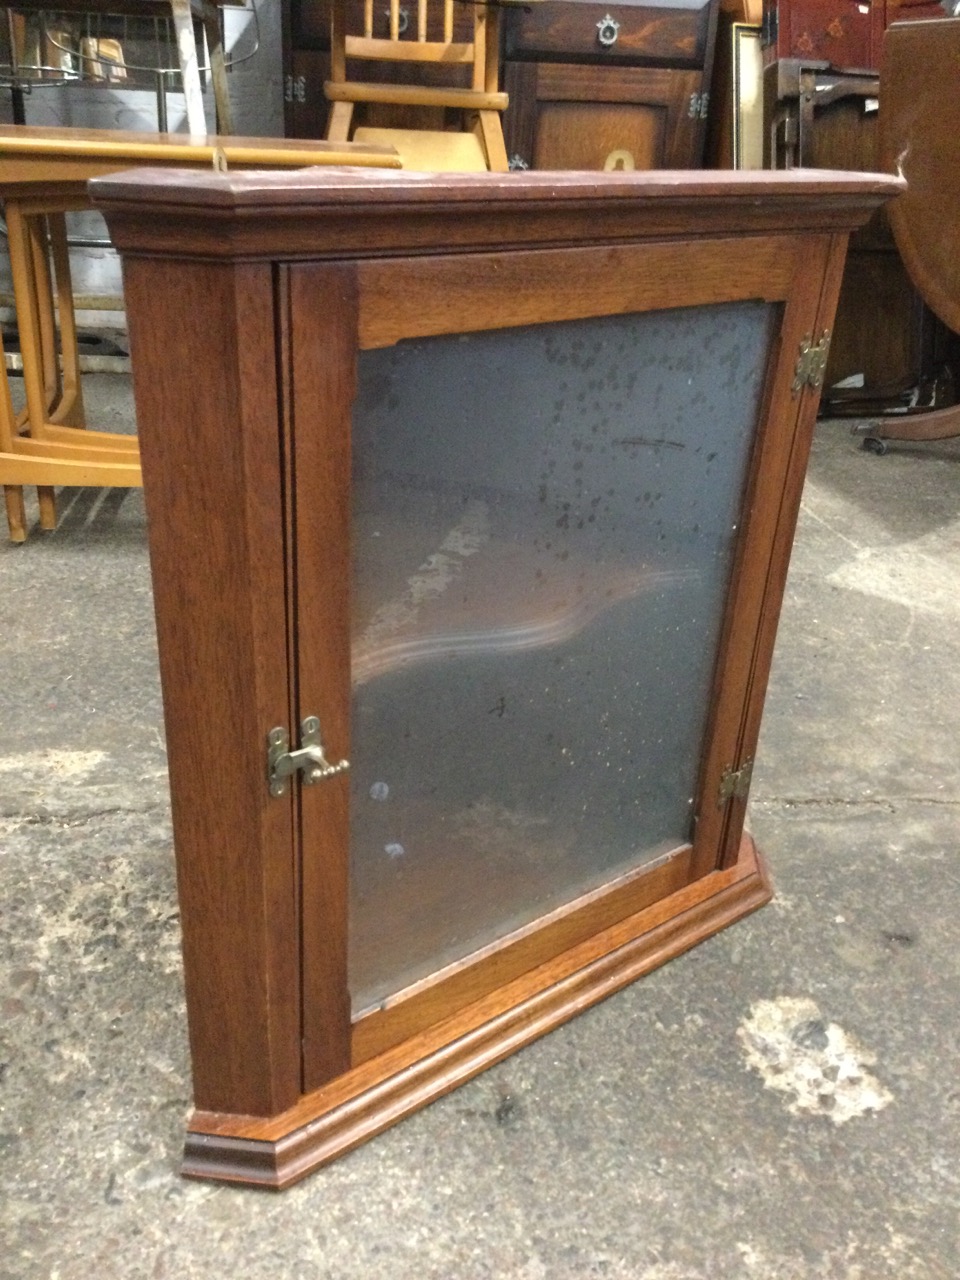 An Edwardian mahogany hanging corner cabinet with moulded cornice above a glazed door with brass - Image 3 of 3